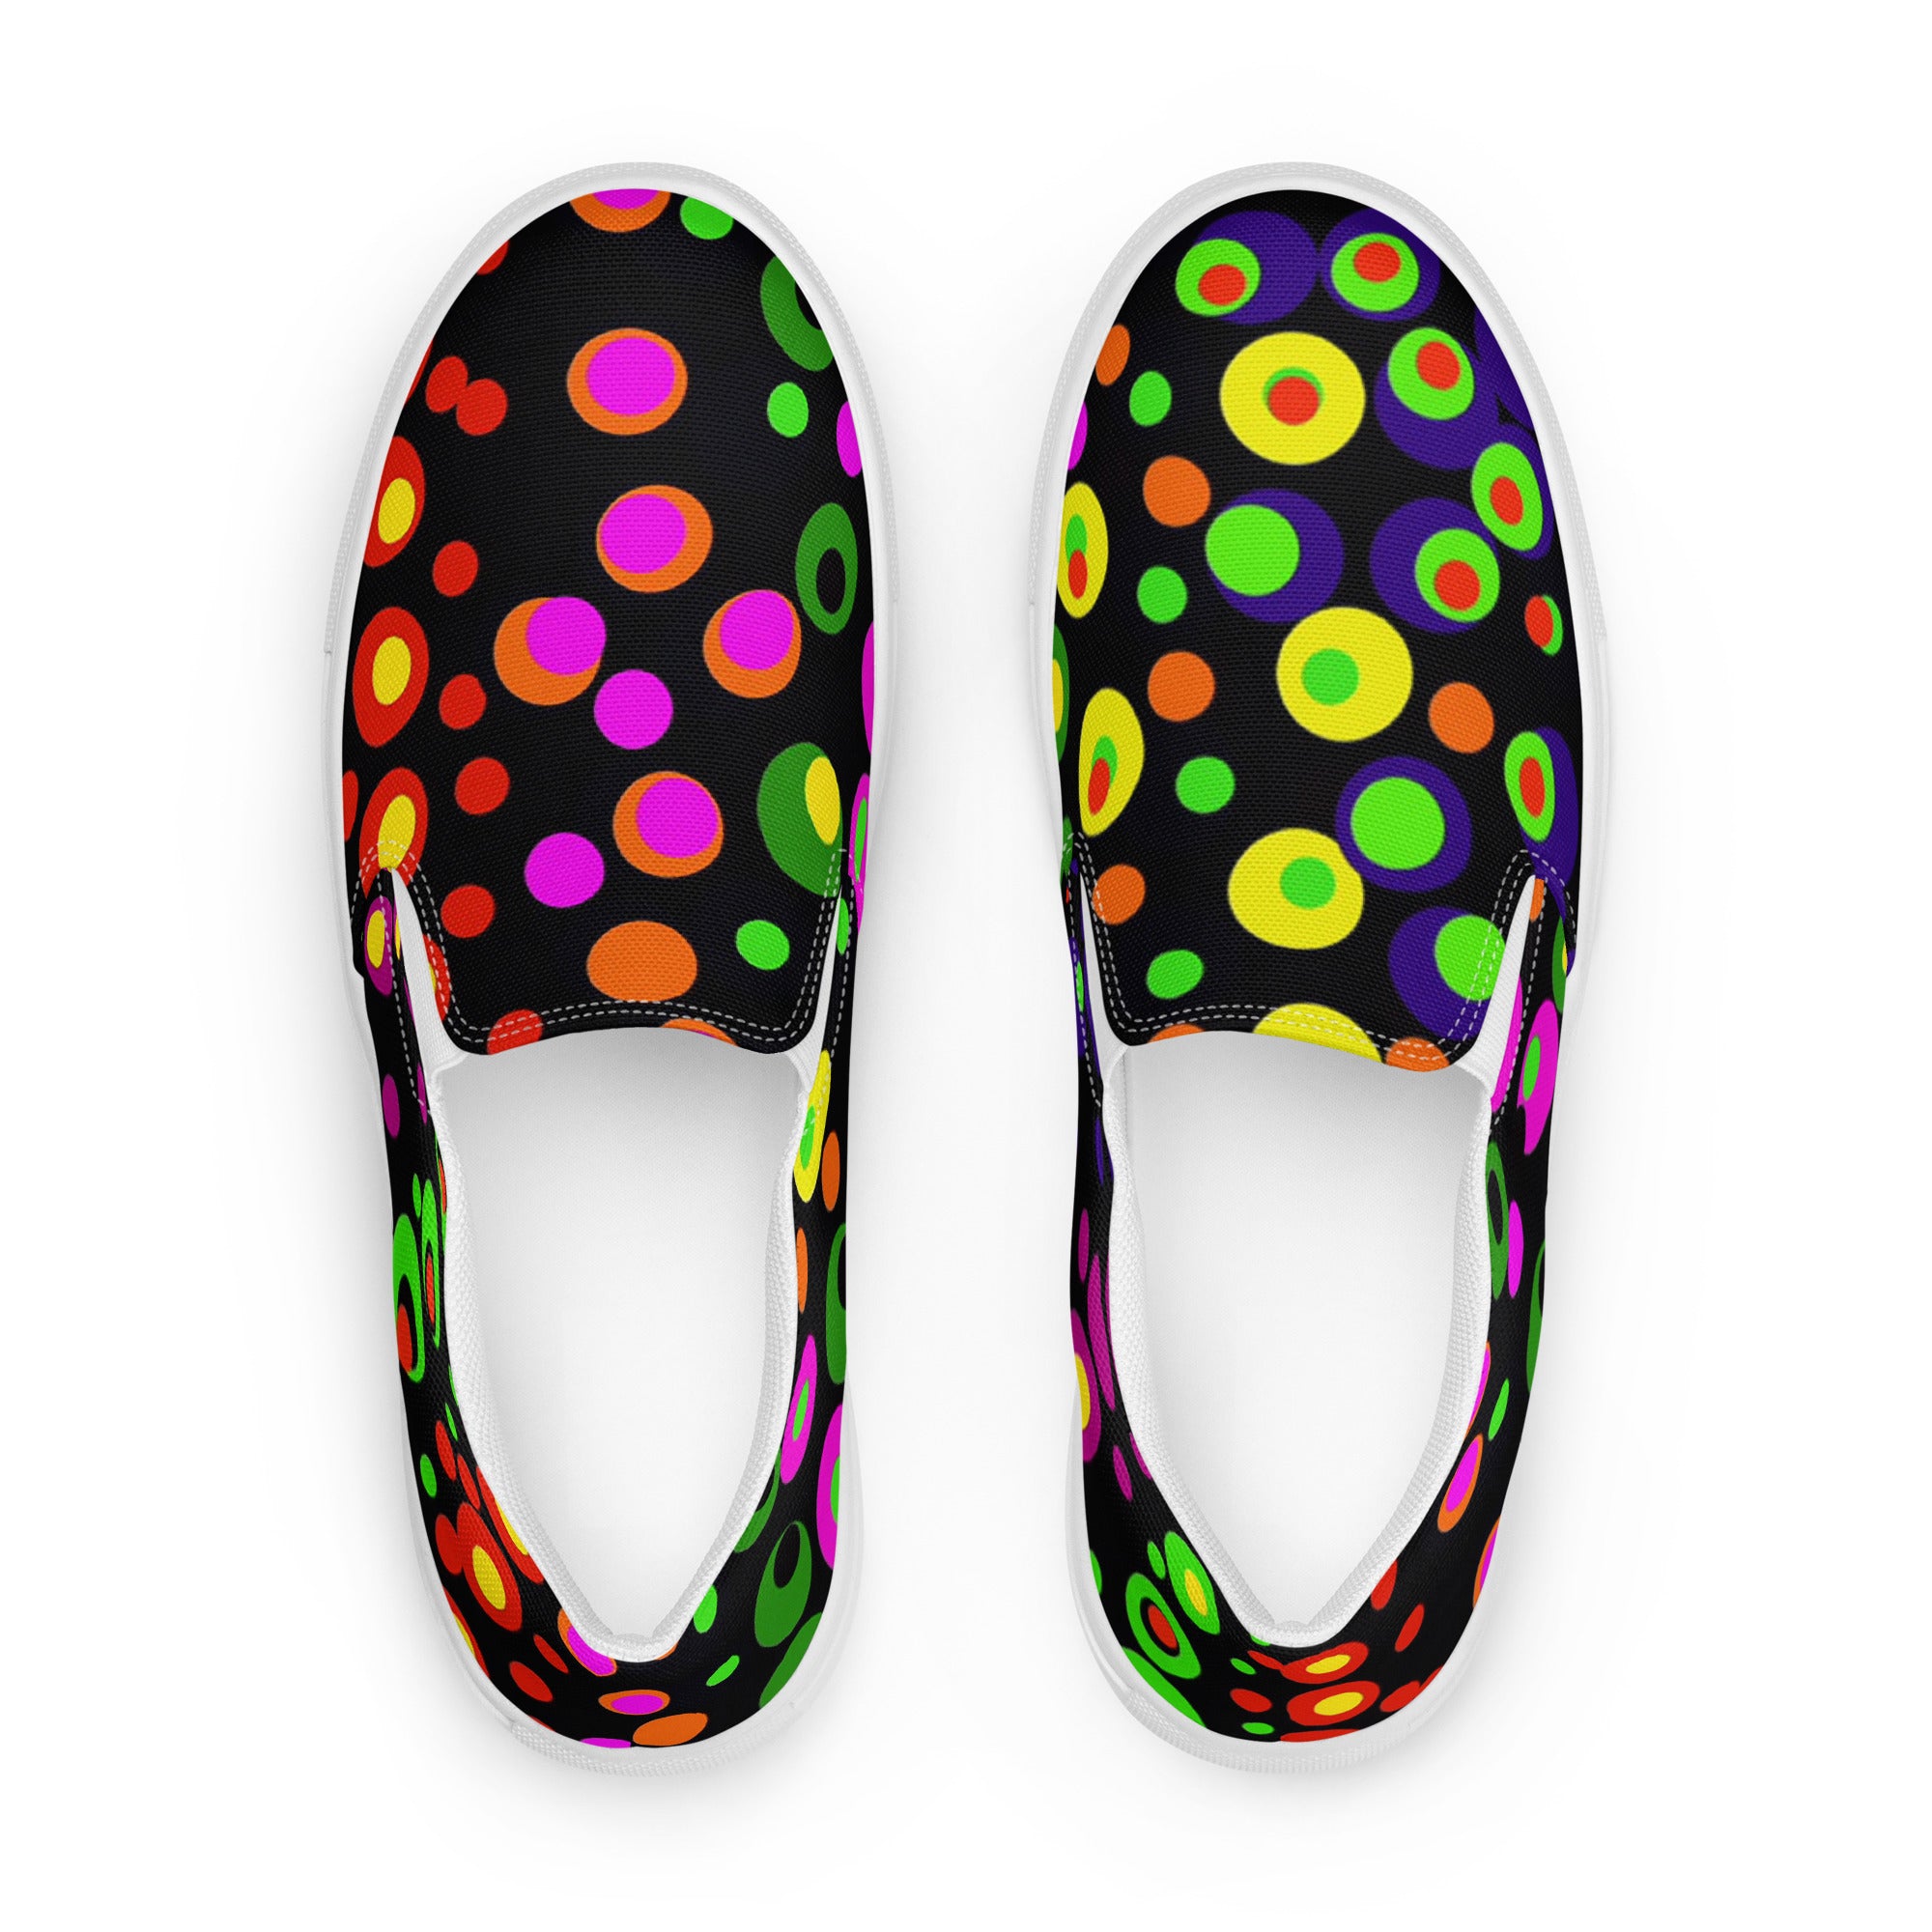 Dots on Dots Women’s slip-on canvas shoes